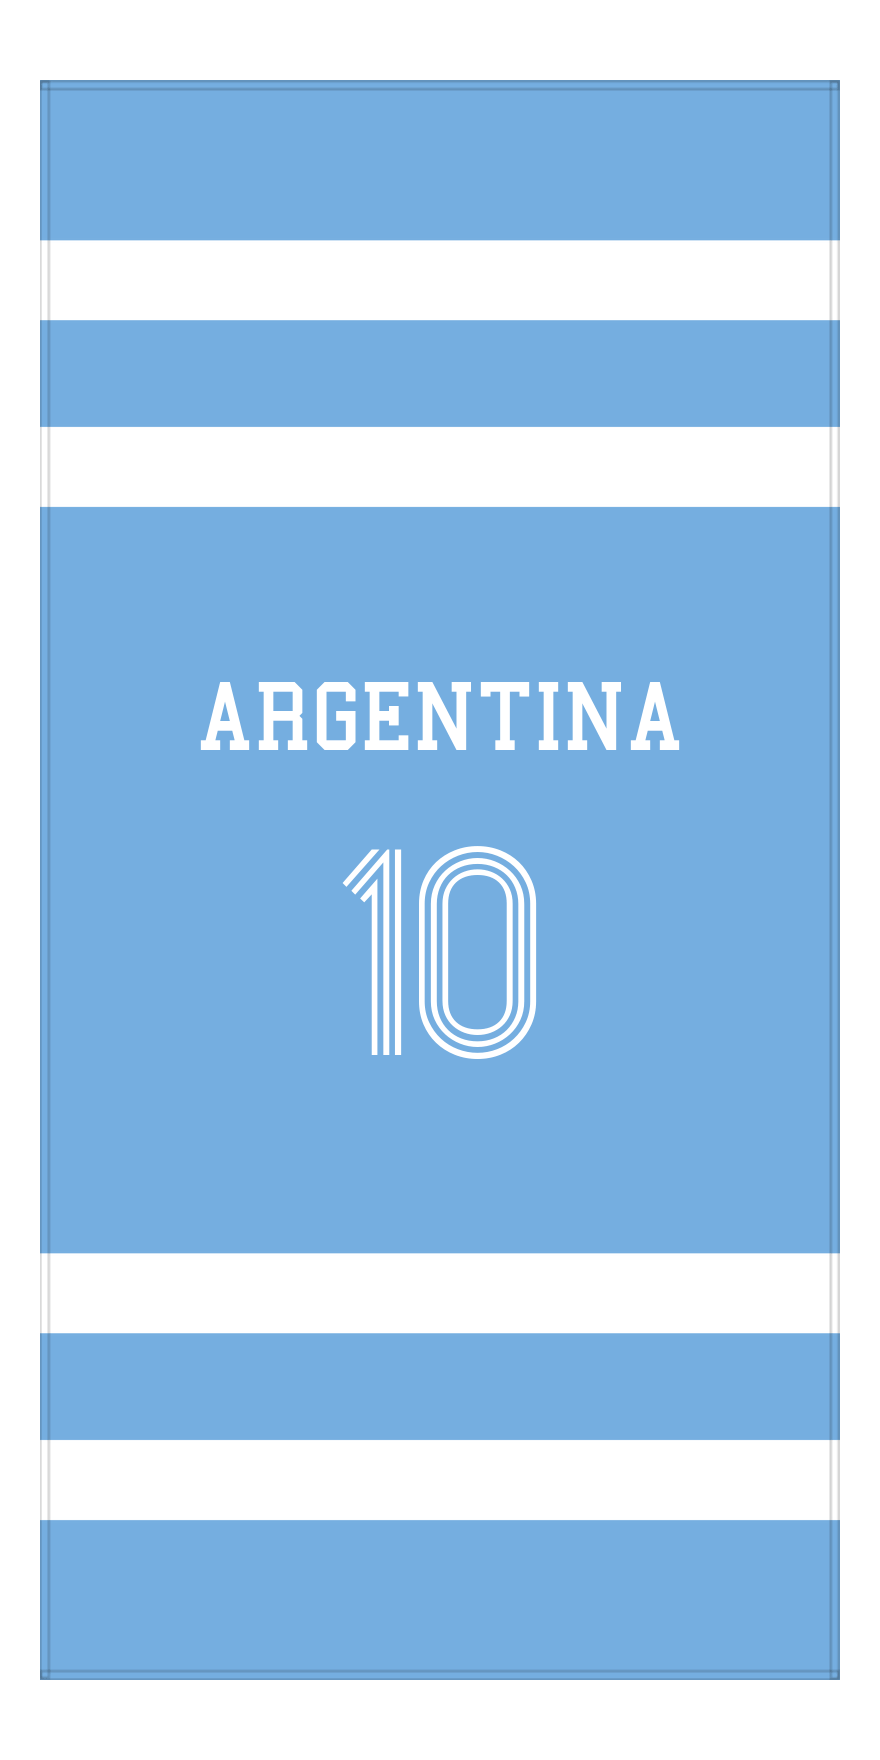 Personalized Jersey Number 1-on-1 Stripes Sports Beach Towel - Argentina - Vertical Design - Front View